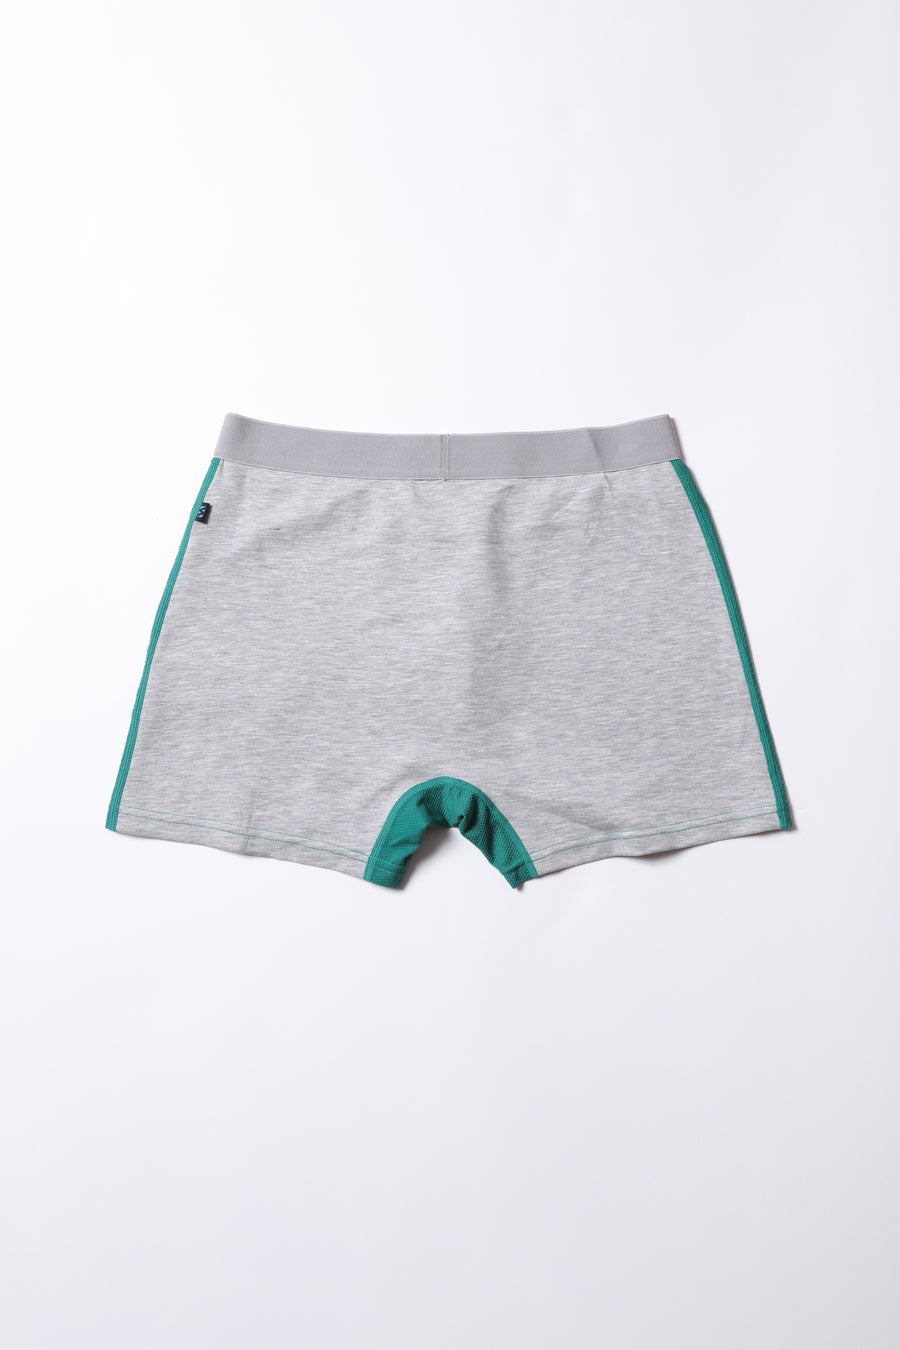 Hybrid wear BOXER（Mesh×Punch）Green×Gray [New Color]